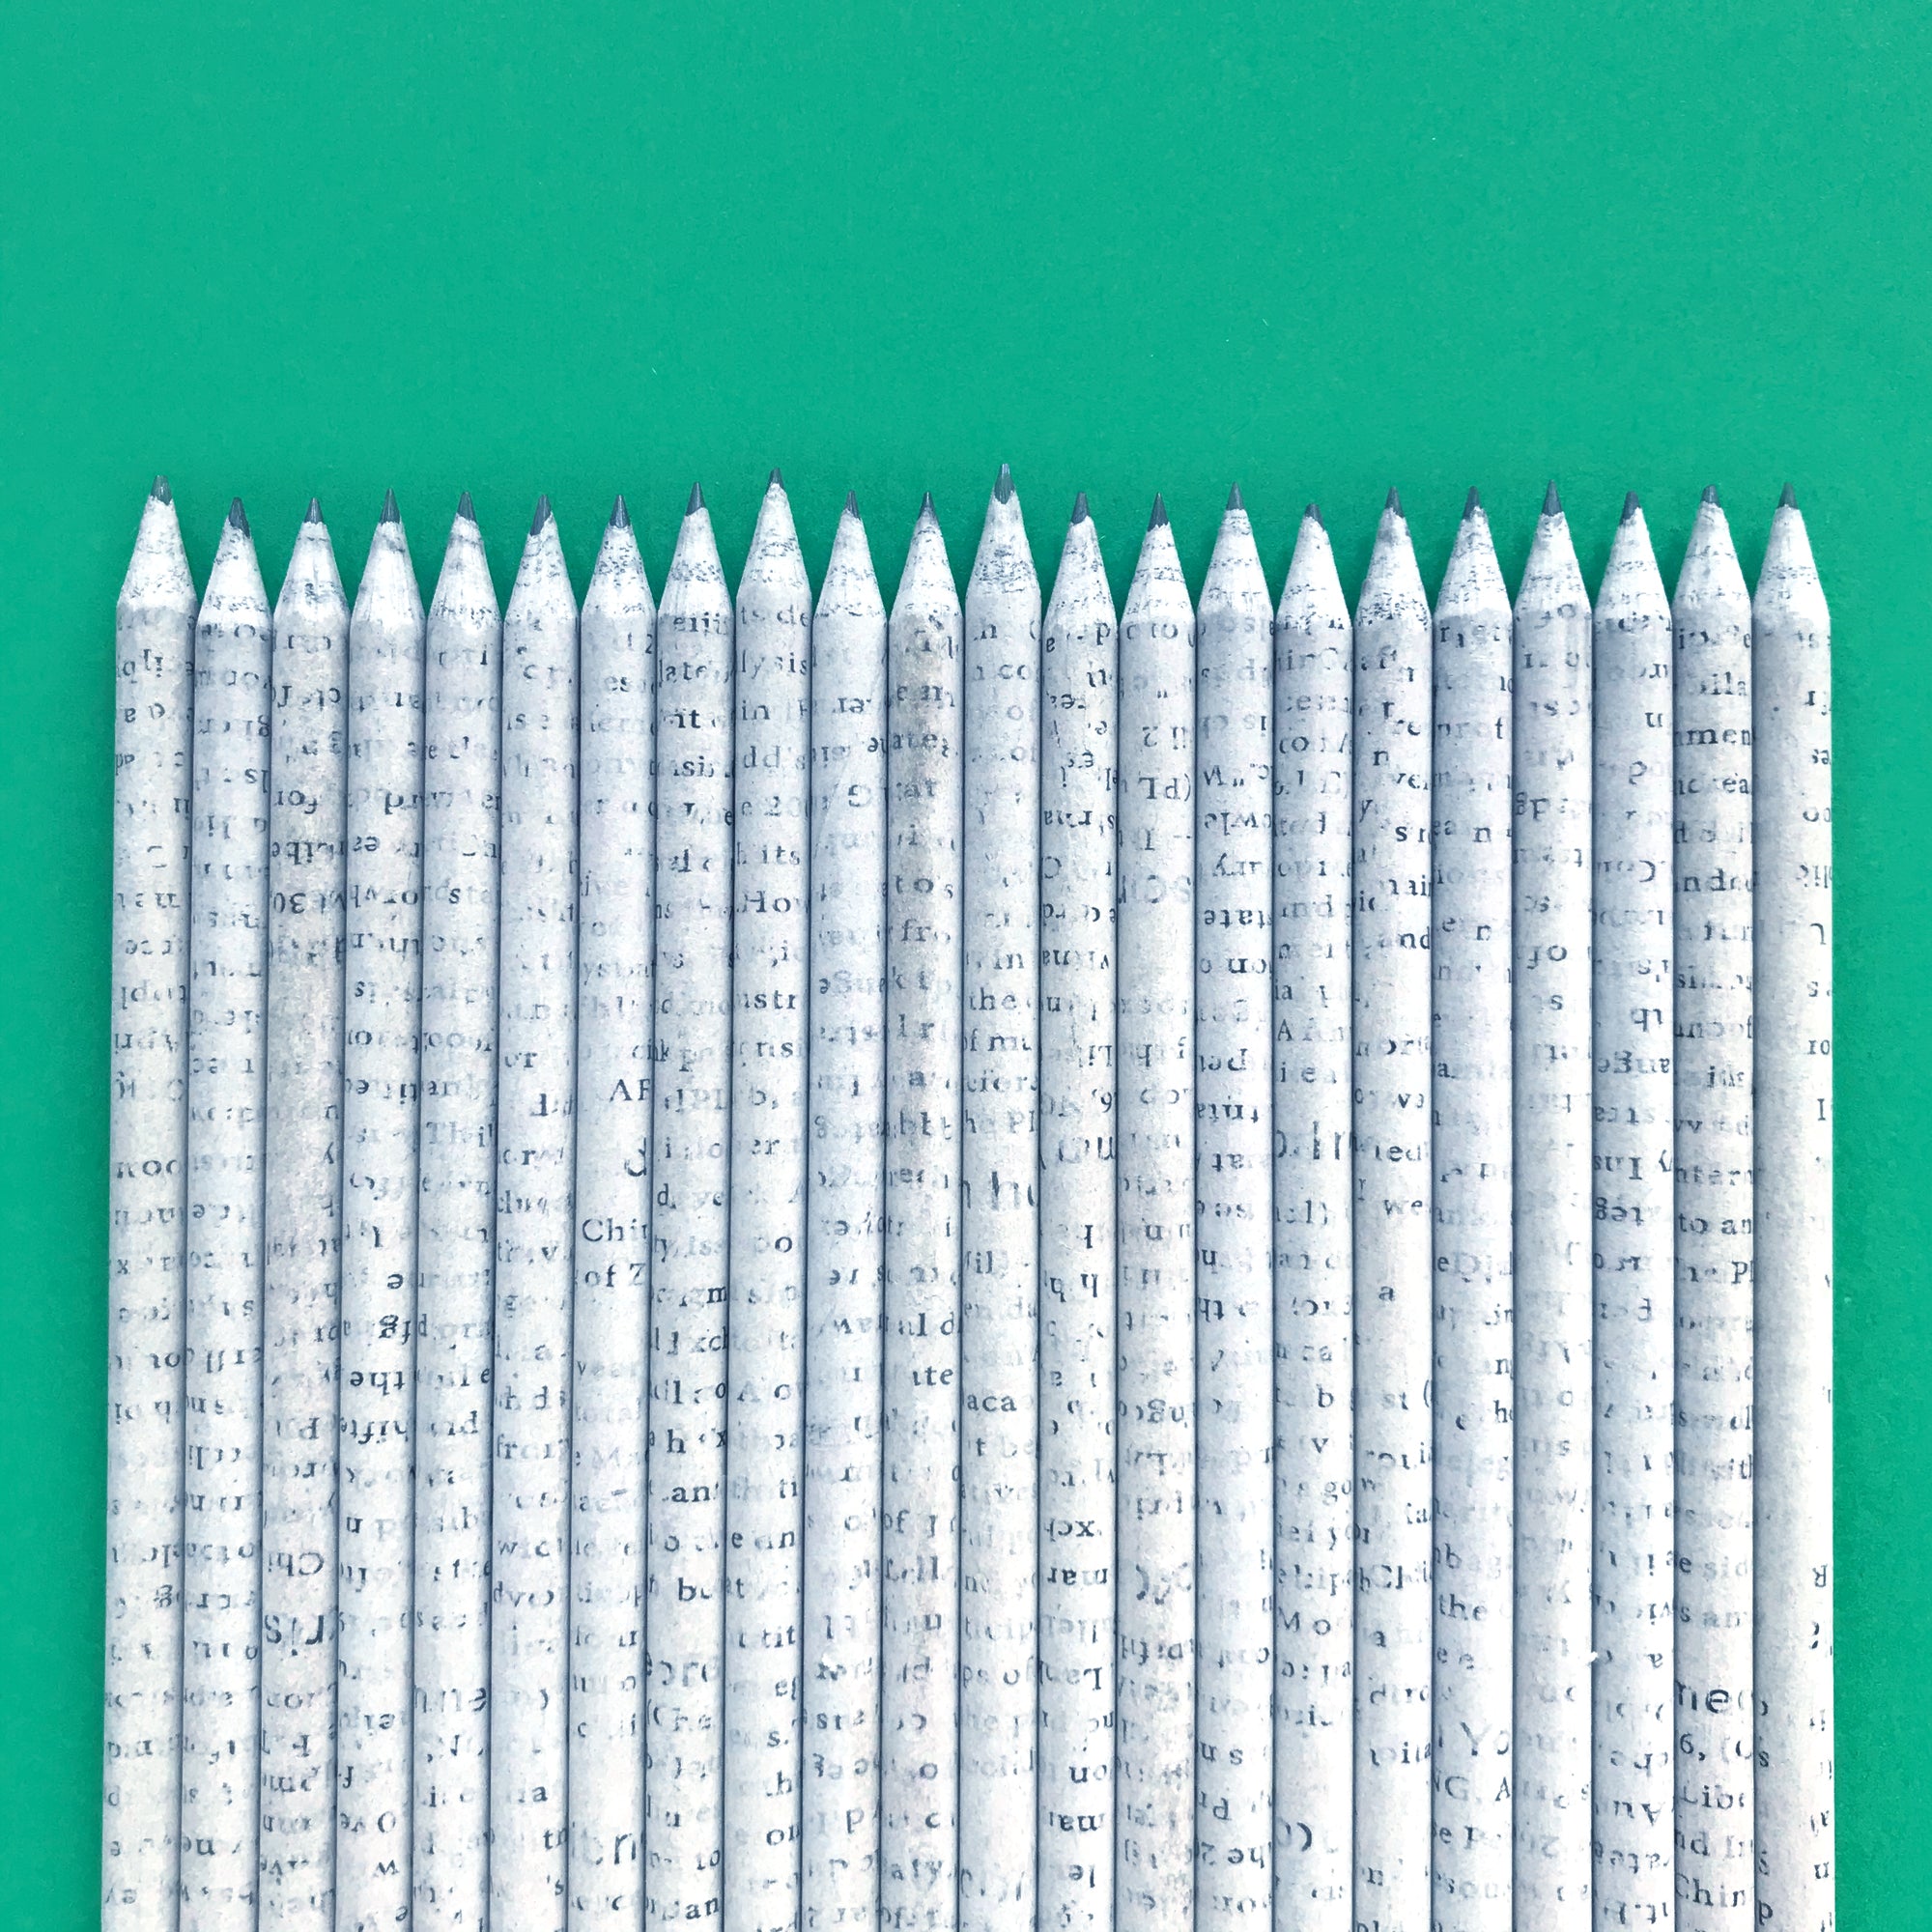 Recycled Newspaper HB Pencils